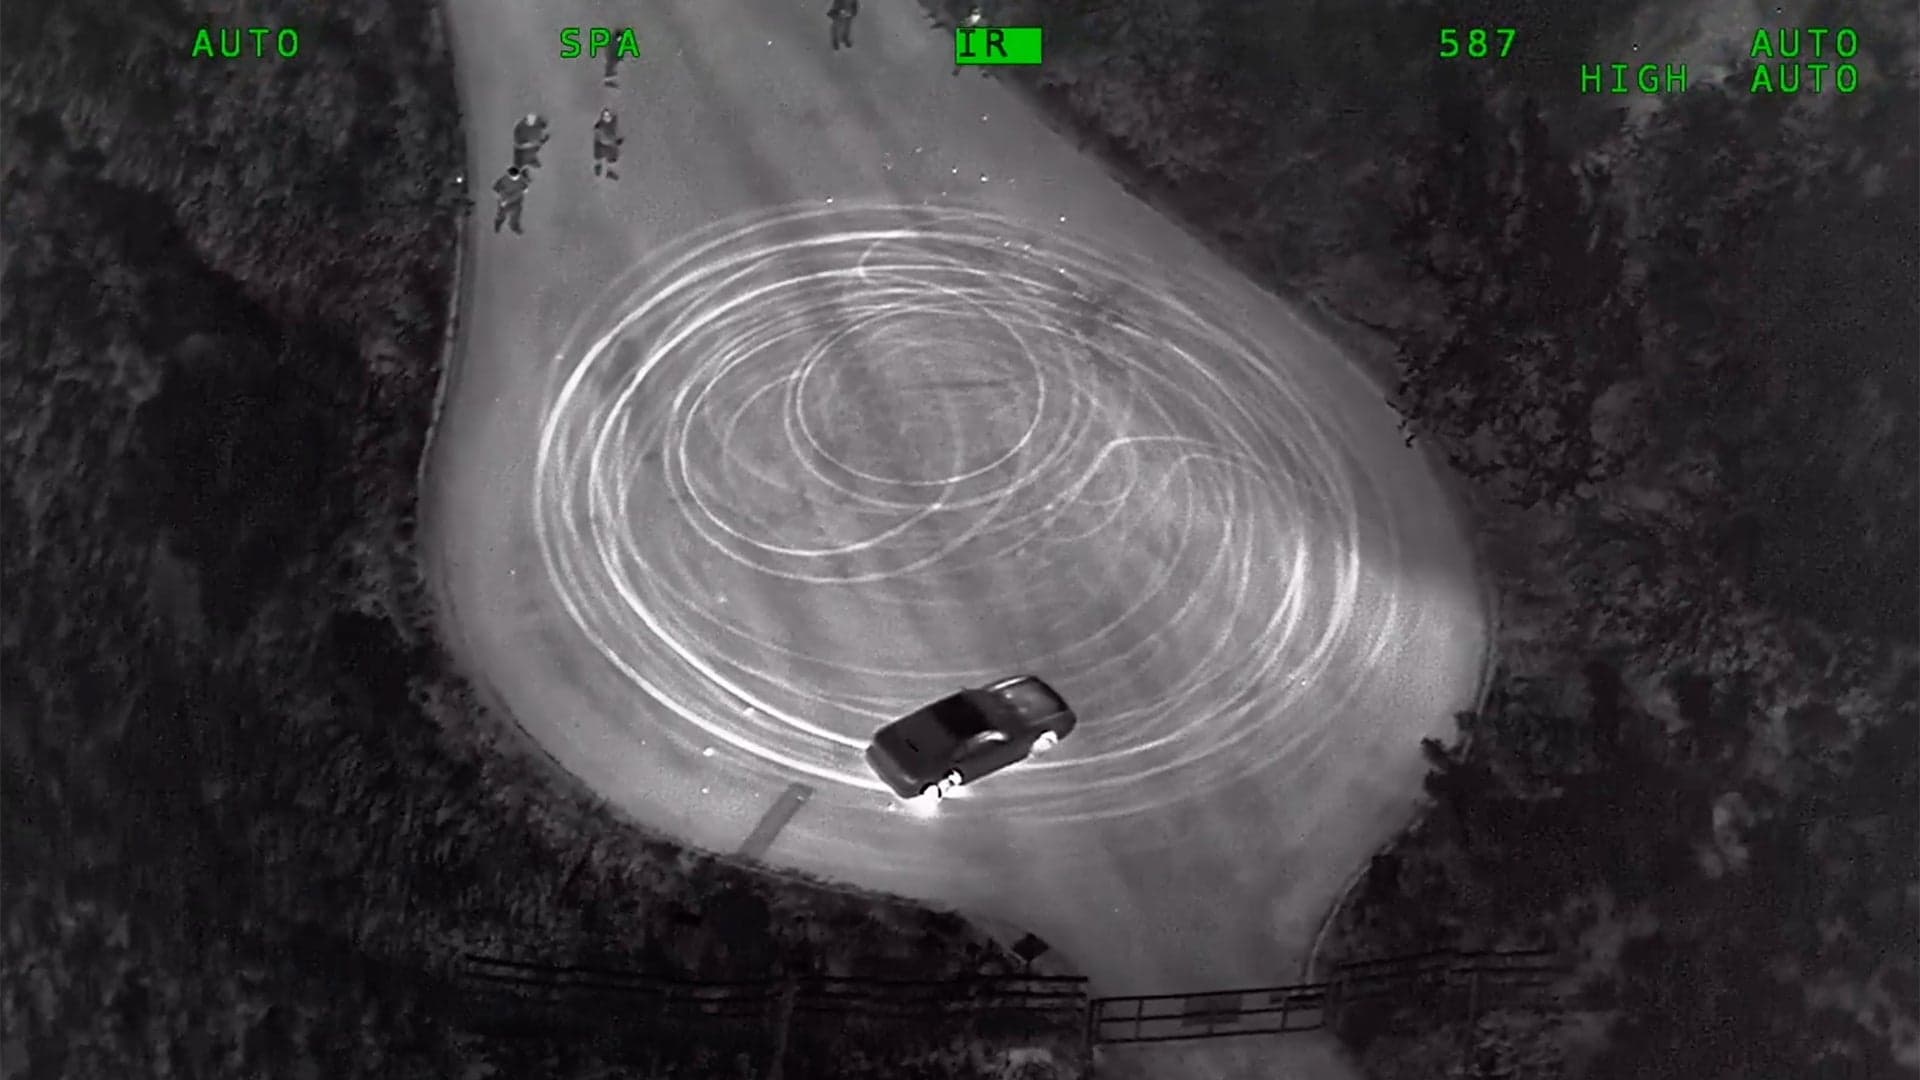 California Police Use Helicopter, 5-Car Squad to Catch Kid Doing Donuts on Rural Road